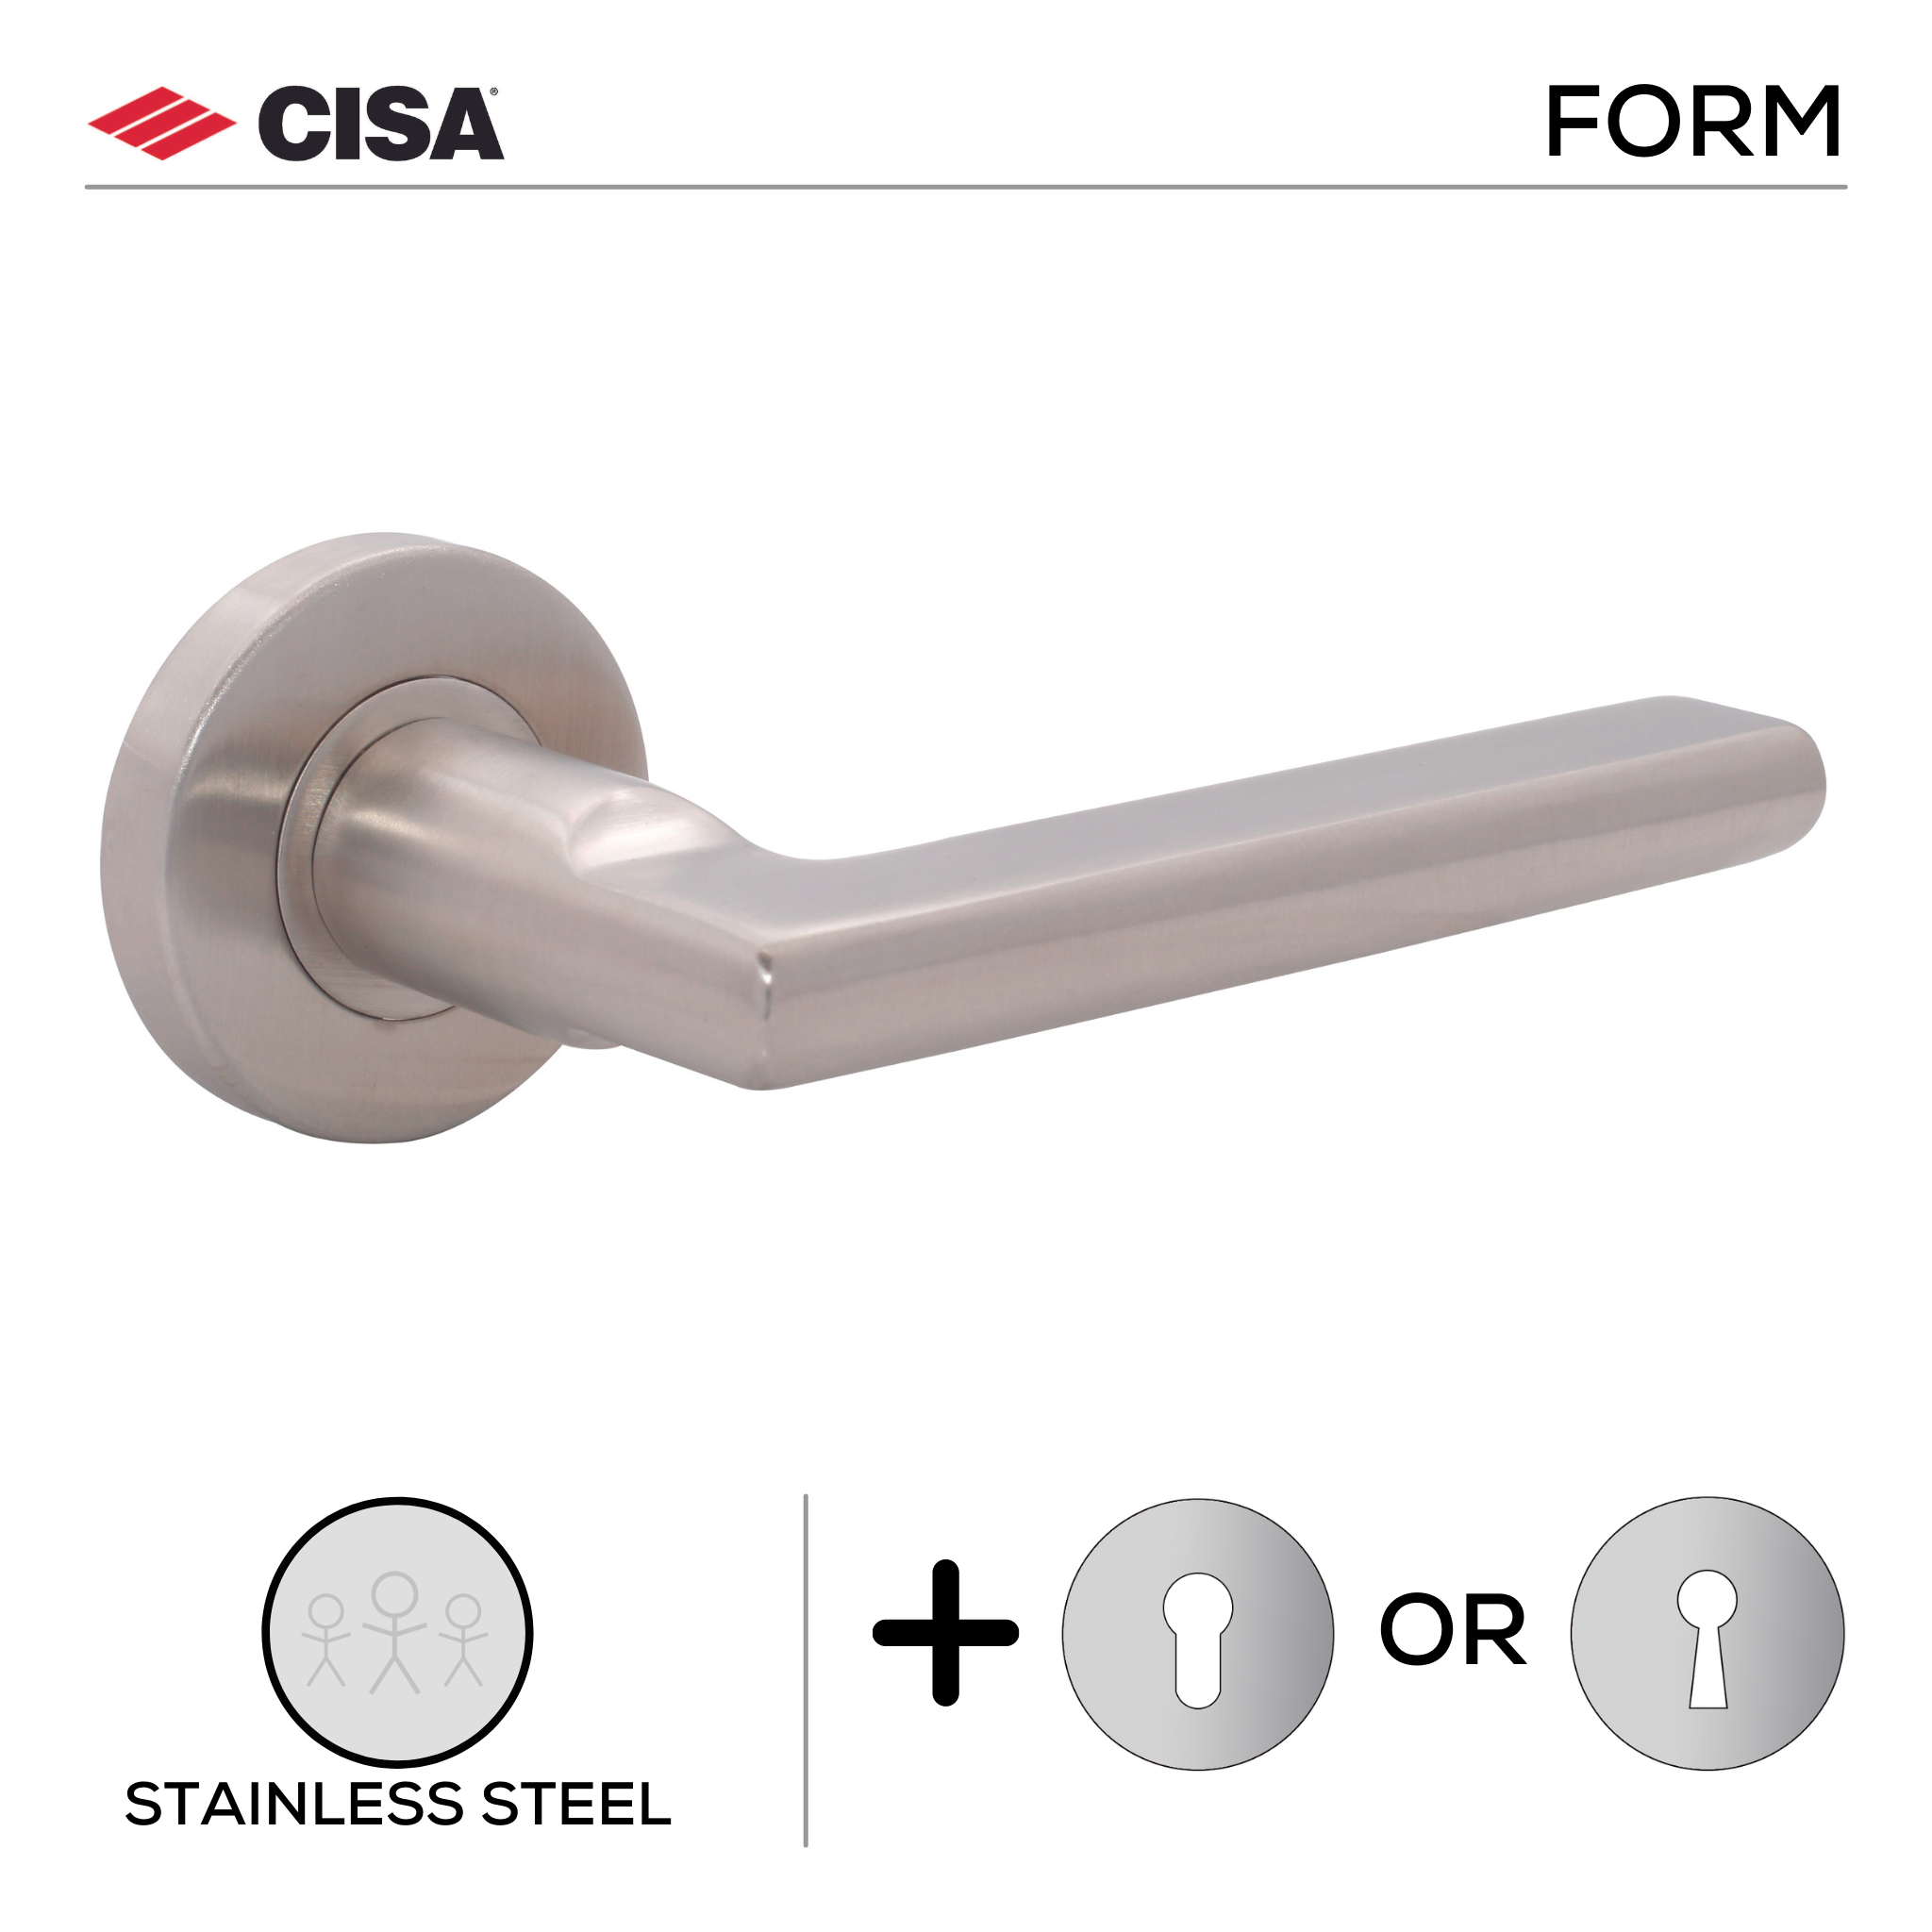 FS106.R._.SS, Lever Handles, Form, On Round Rose, With Escutcheons, 134mm (l), Stainless Steel, CISA